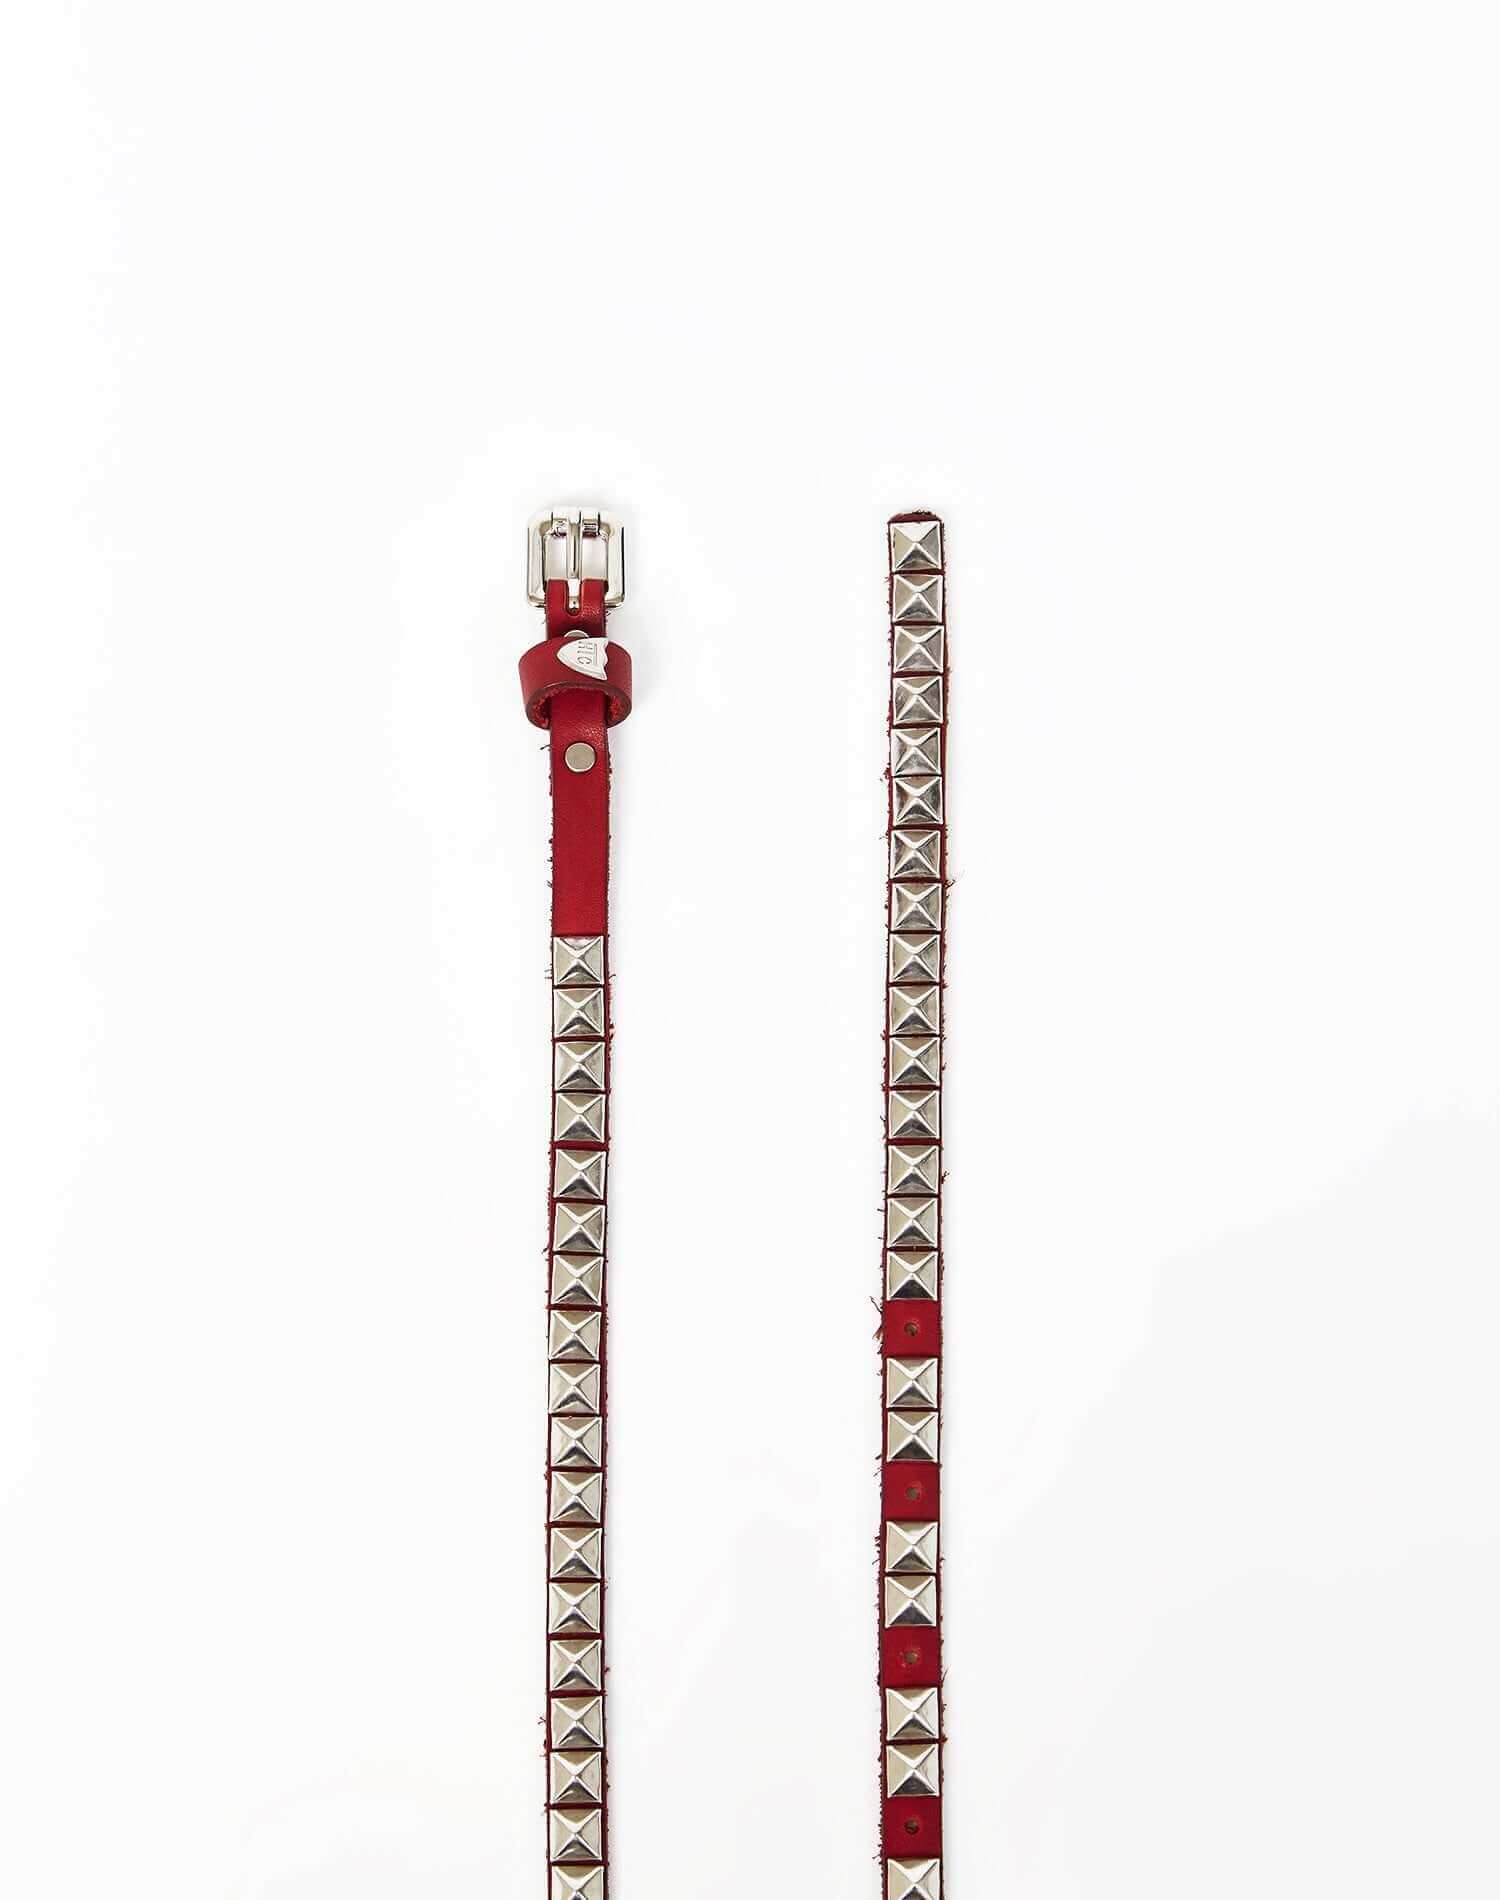 CHELSIE BELT Red leather belt with pyramidal studs, buckle and belt loop in shiny metal. Height: 1 cm. Made in Italy. HTC LOS ANGELES